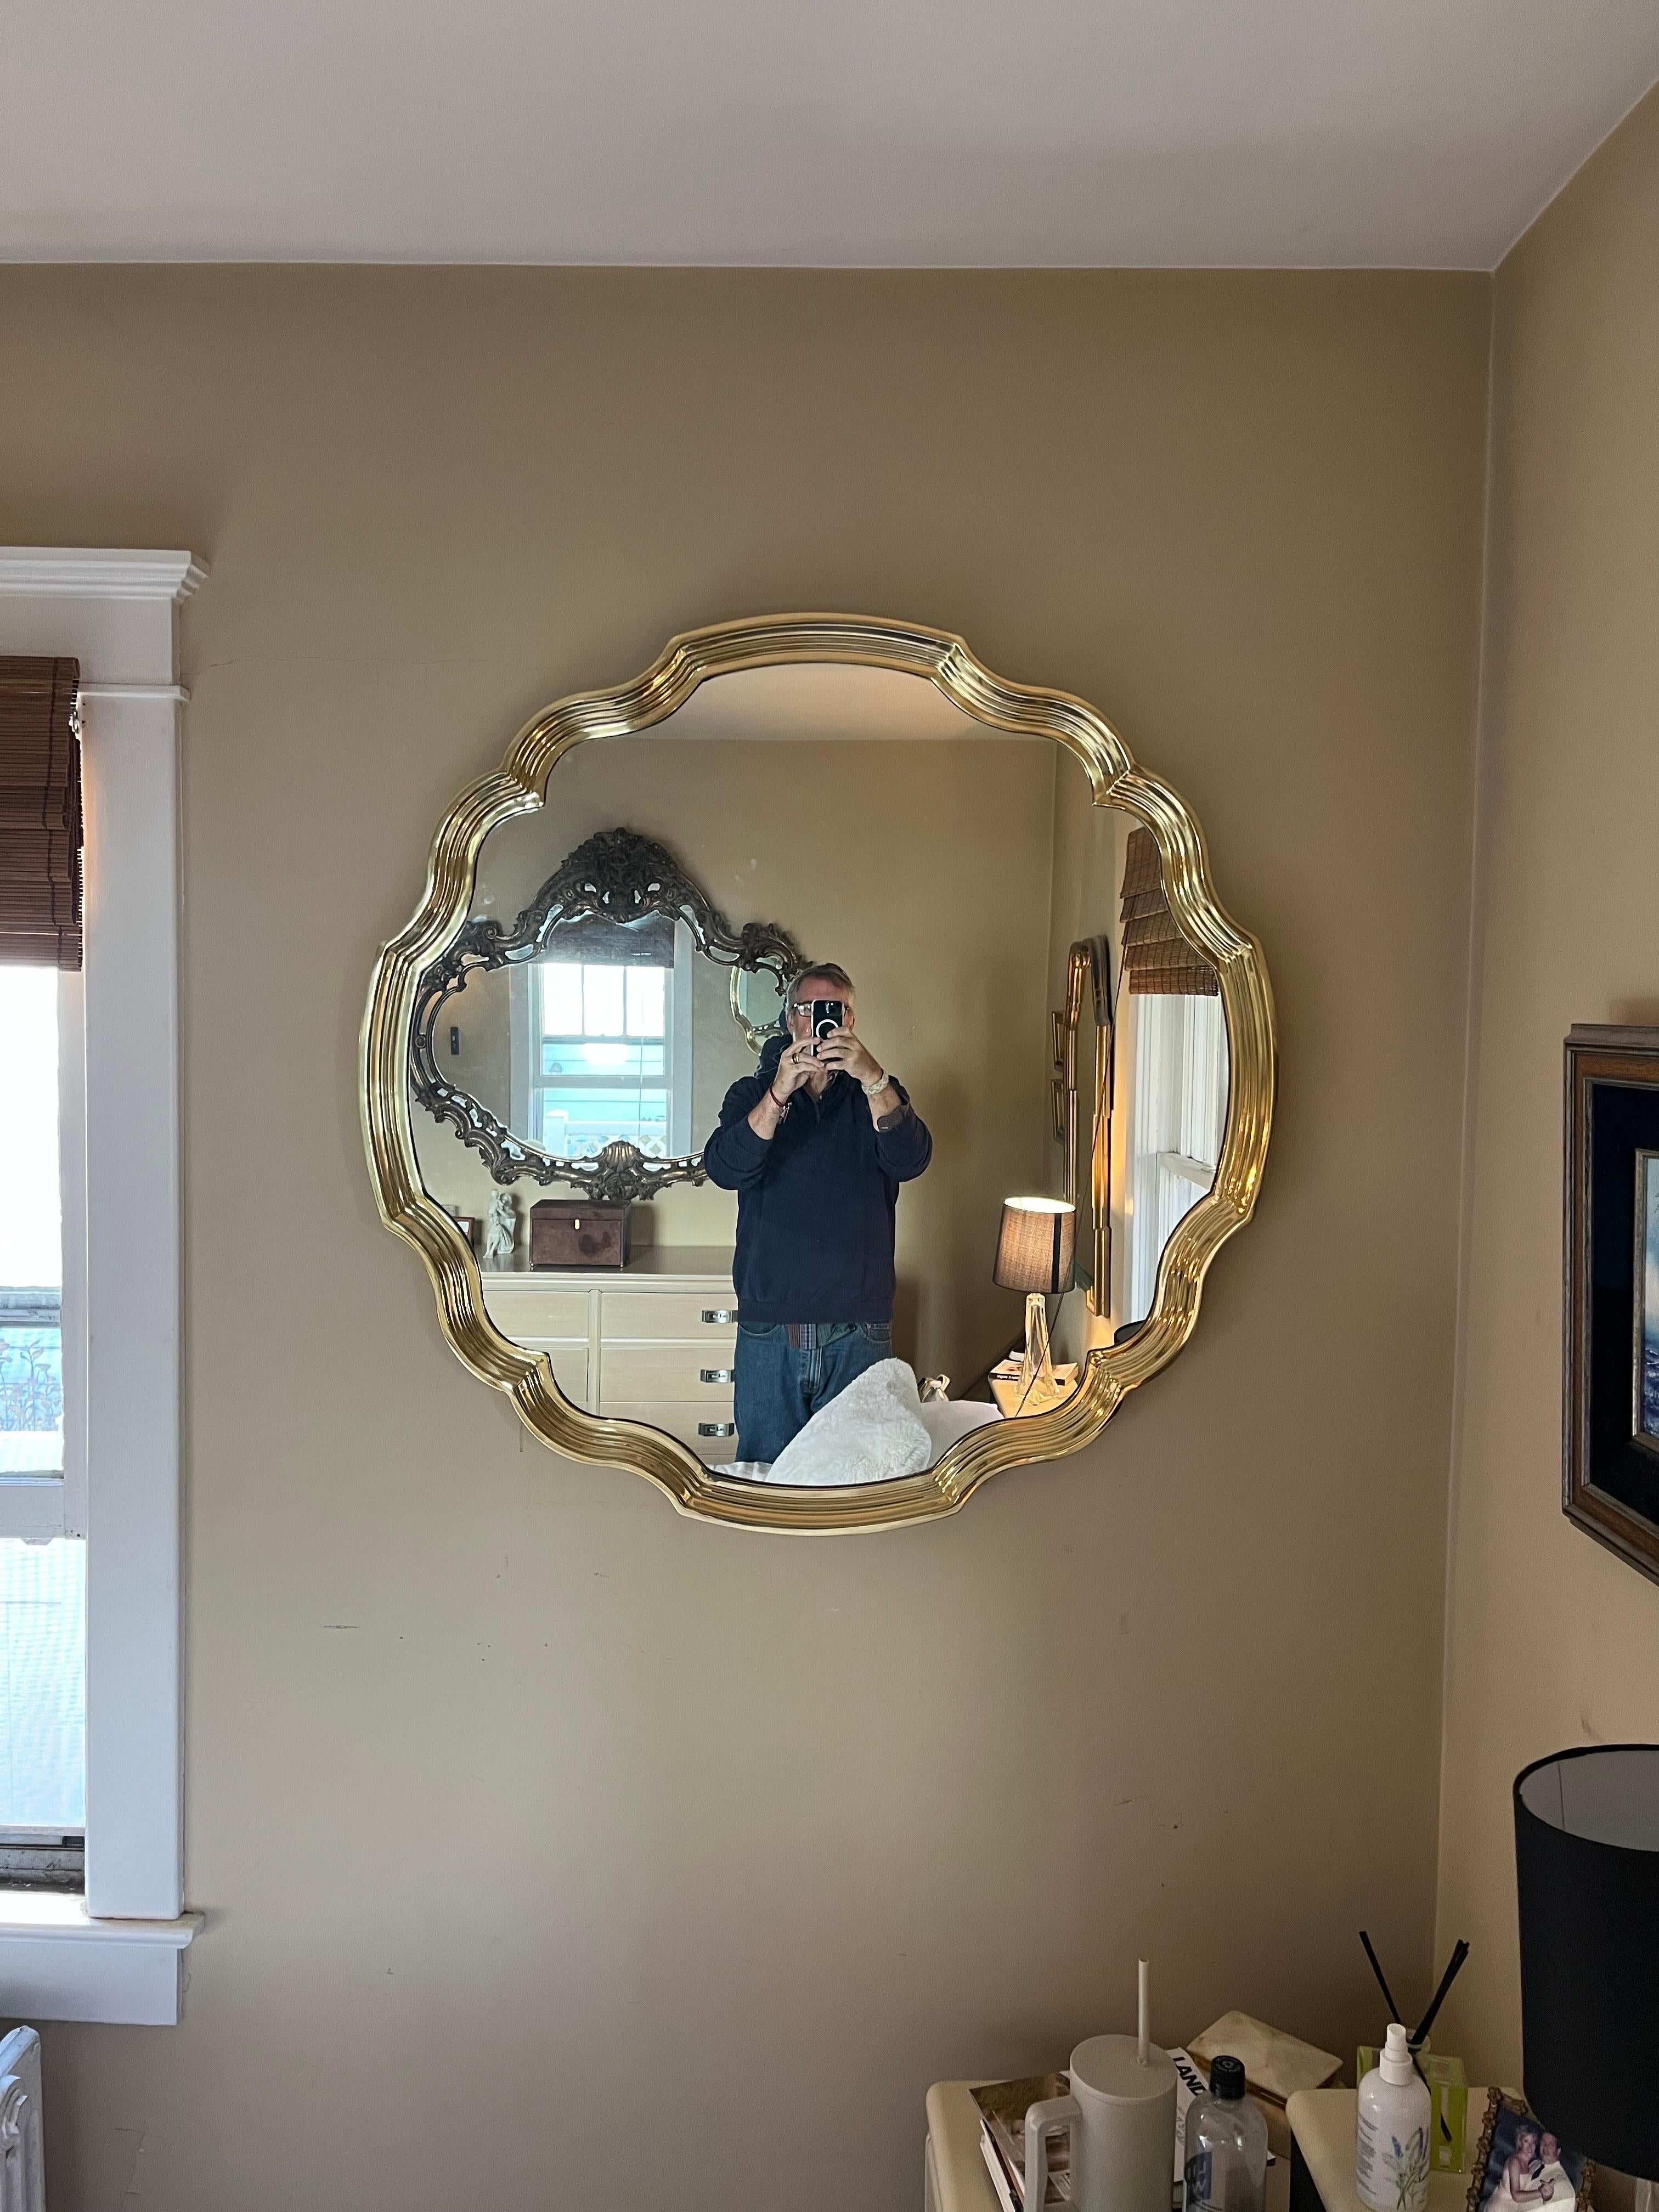 Jaw dropping solid scalloped polished brass mirror by Baker furniture. Unique in it's circular design. Deep channels in the scallop boarder. 
Curbside to NYC/Philly $400